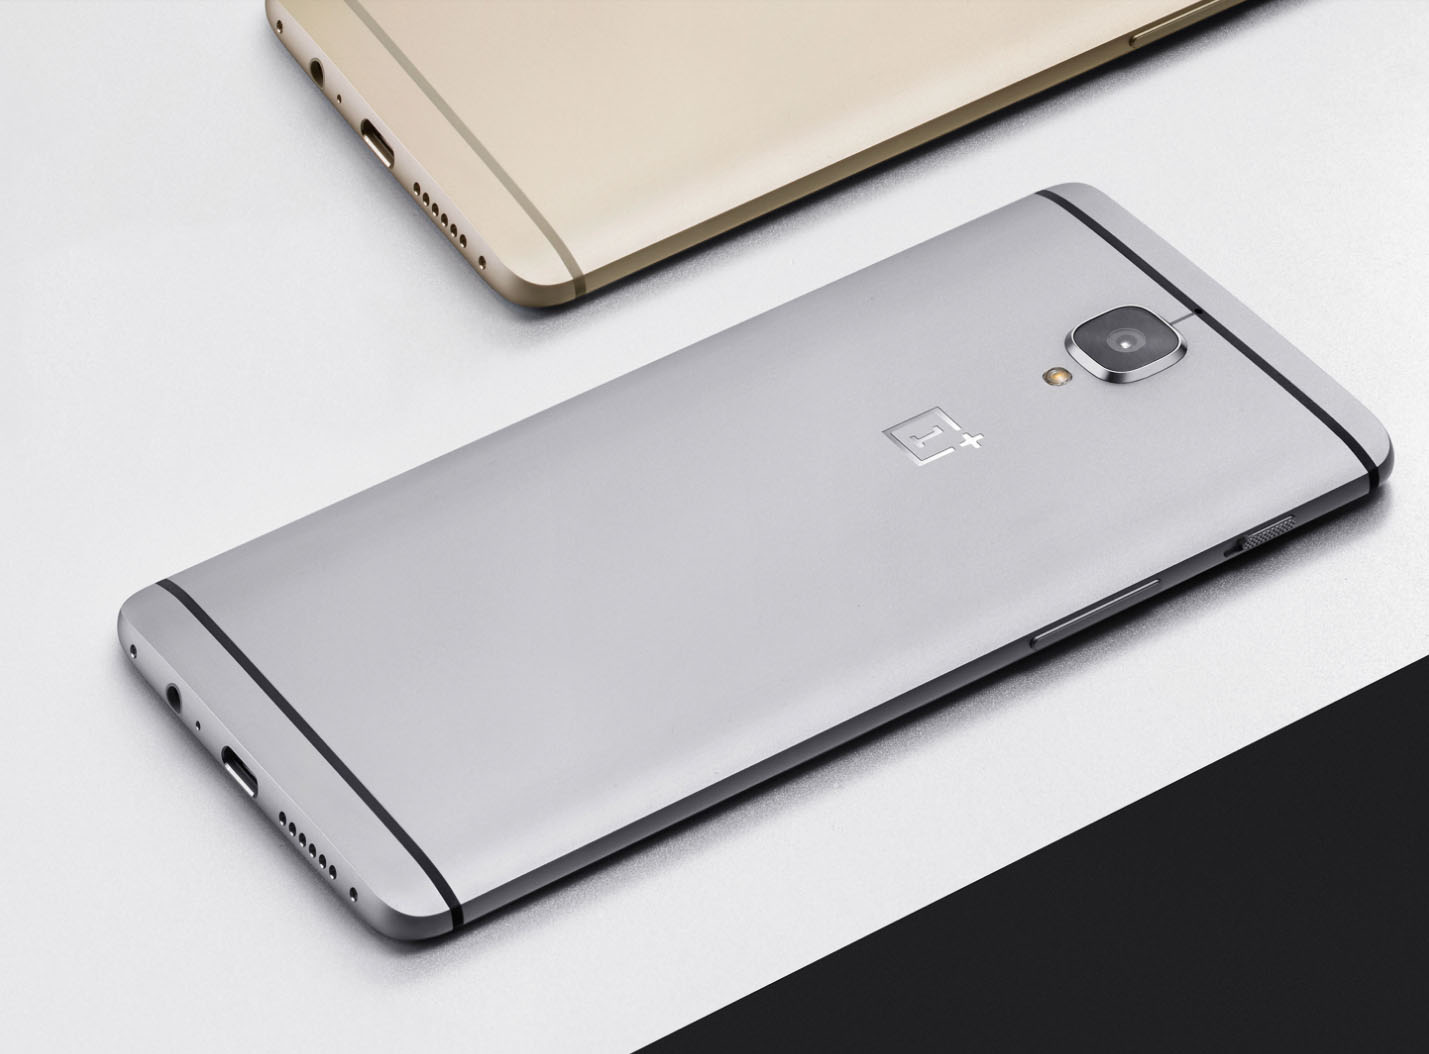 OnePlus 3 announced with a $399 price tag and a ton of amazing hardware